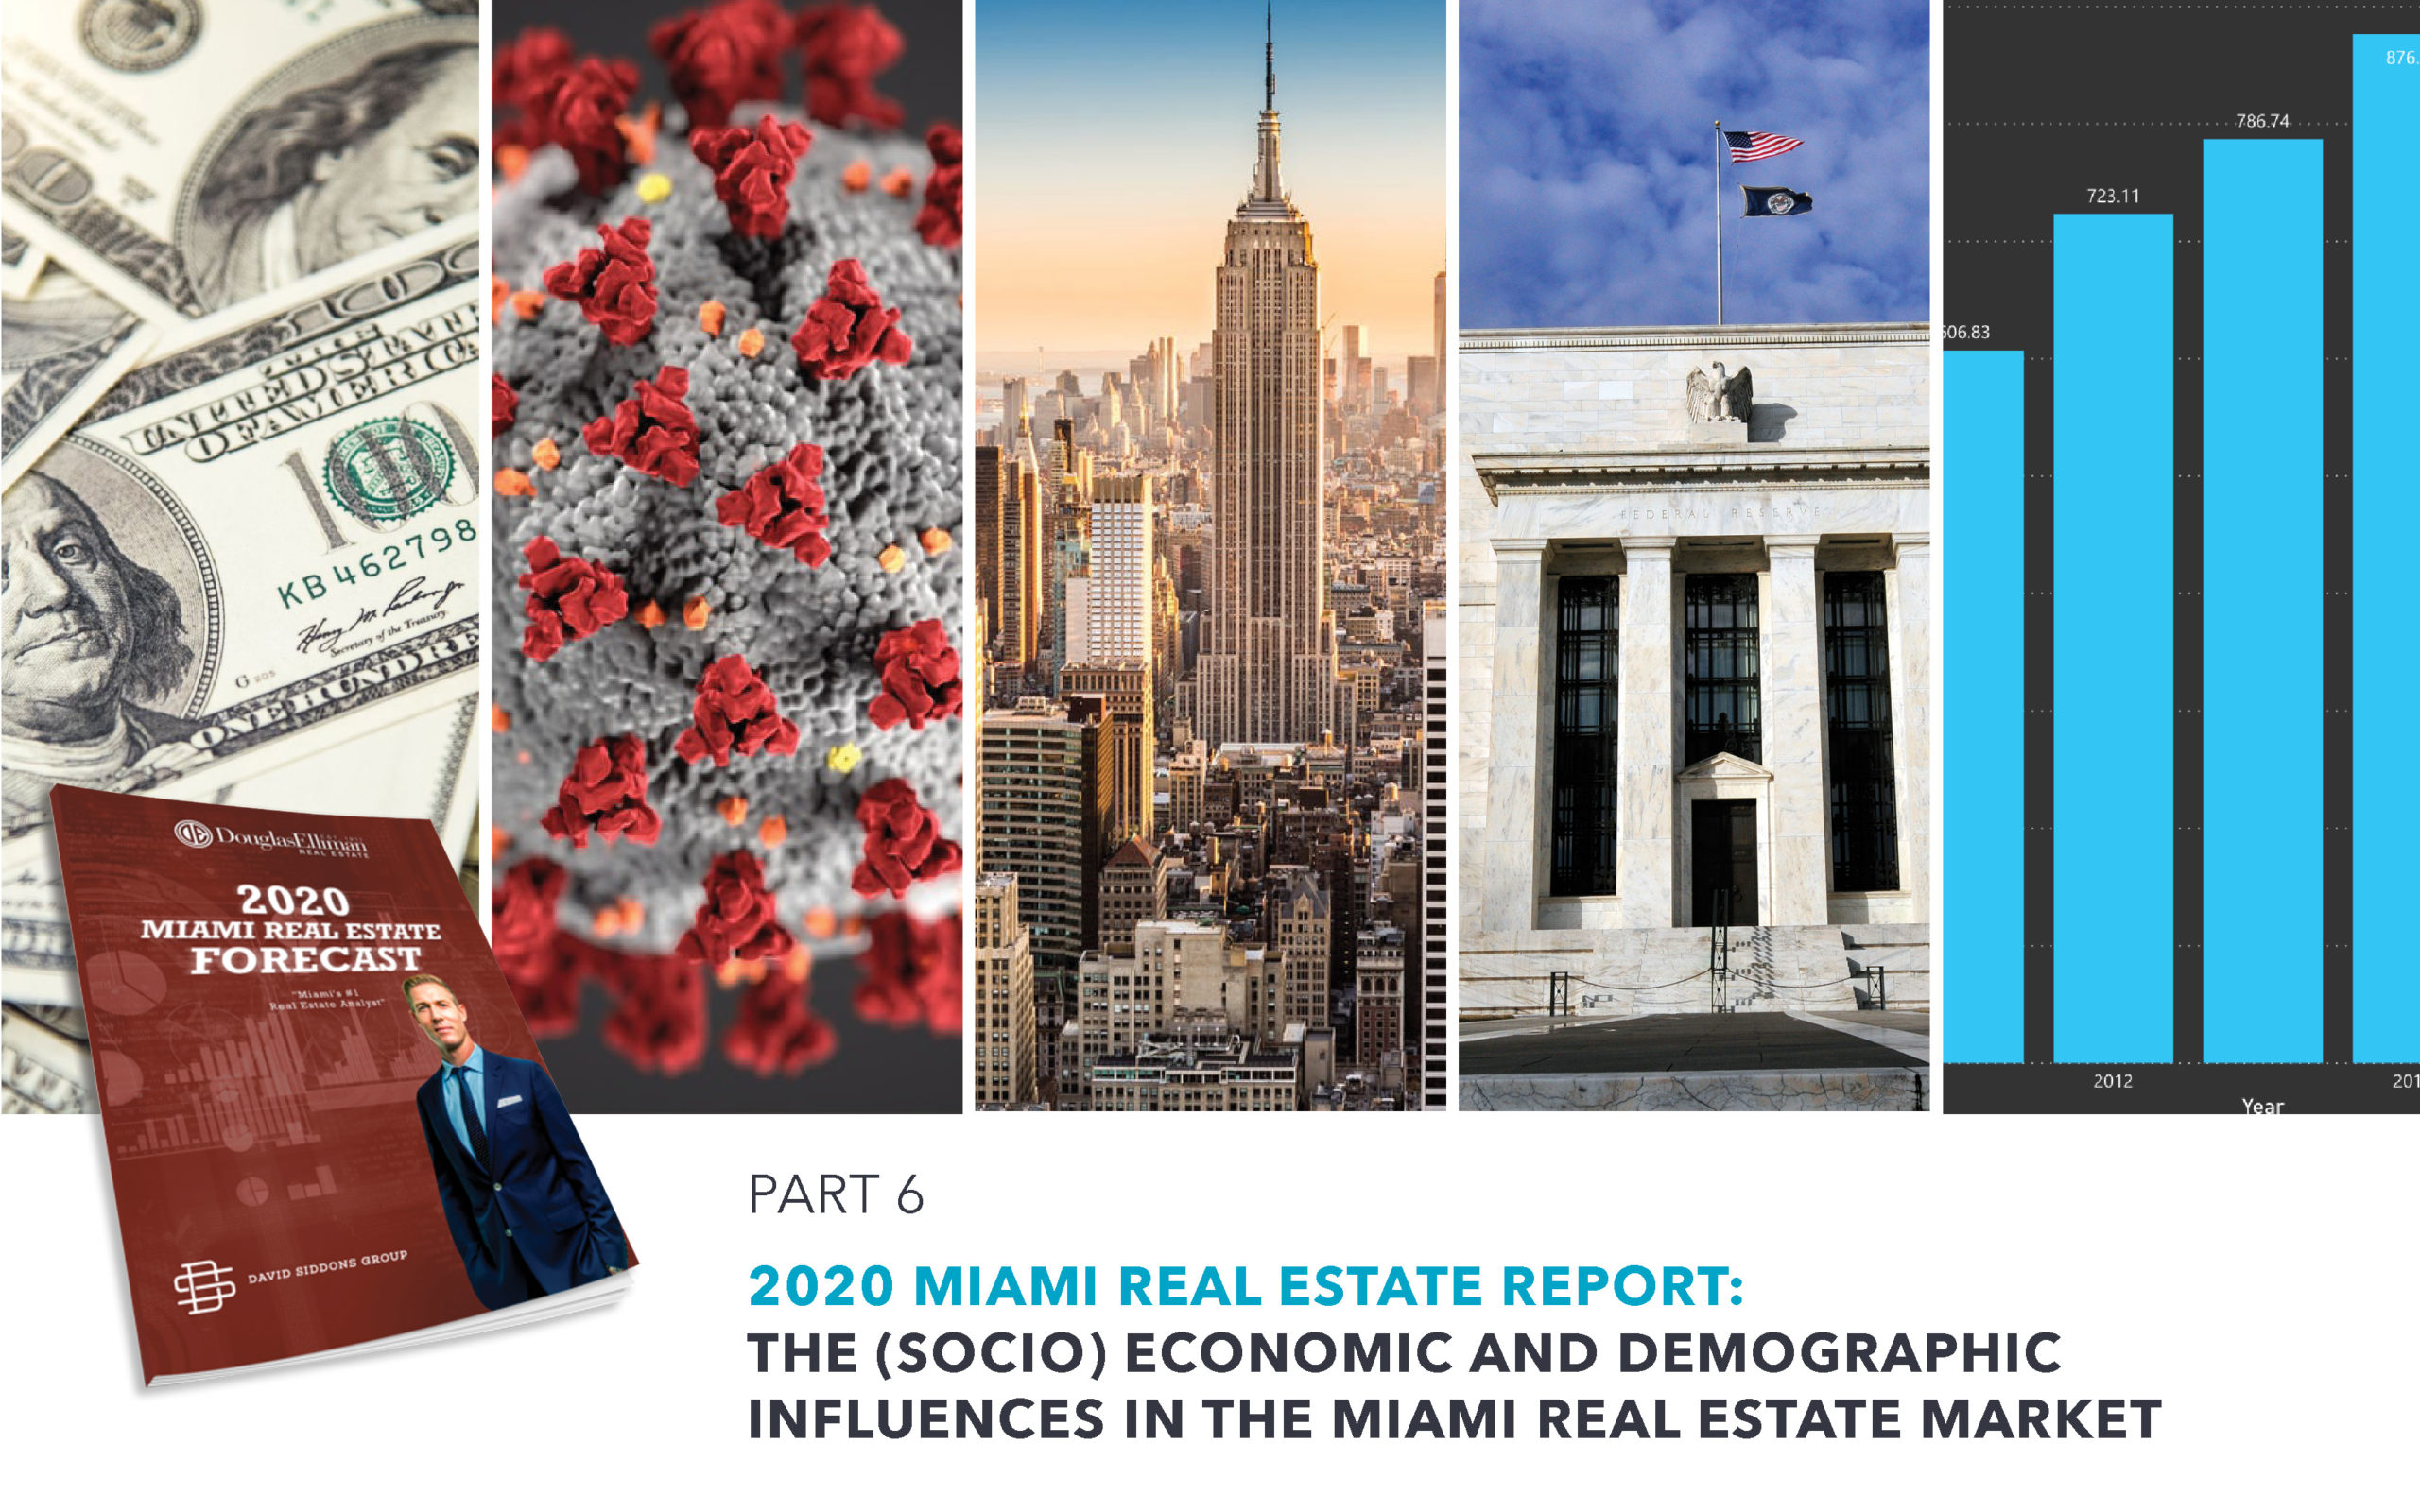 The Q1 2020 Miami Real Estate Report and Forecast